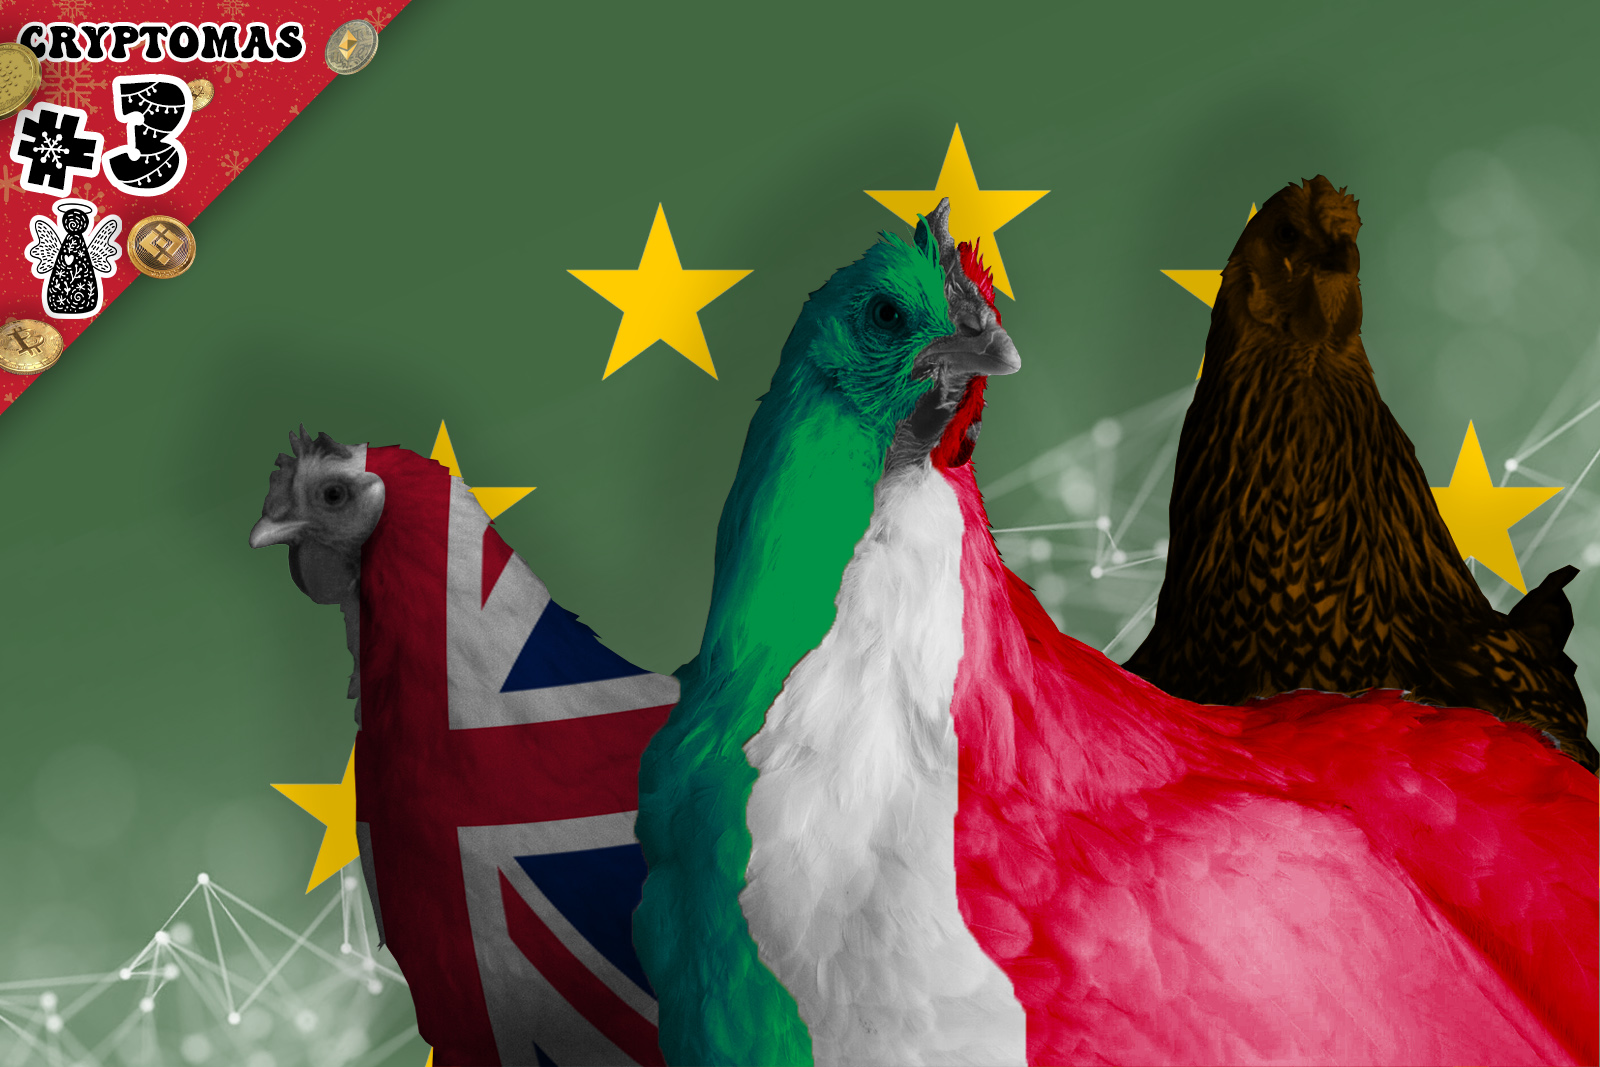 A Christmassy corner denotes "Cryptomas #3". The central image features three hens, each in the colours of the UK, Italy, and Cyprus